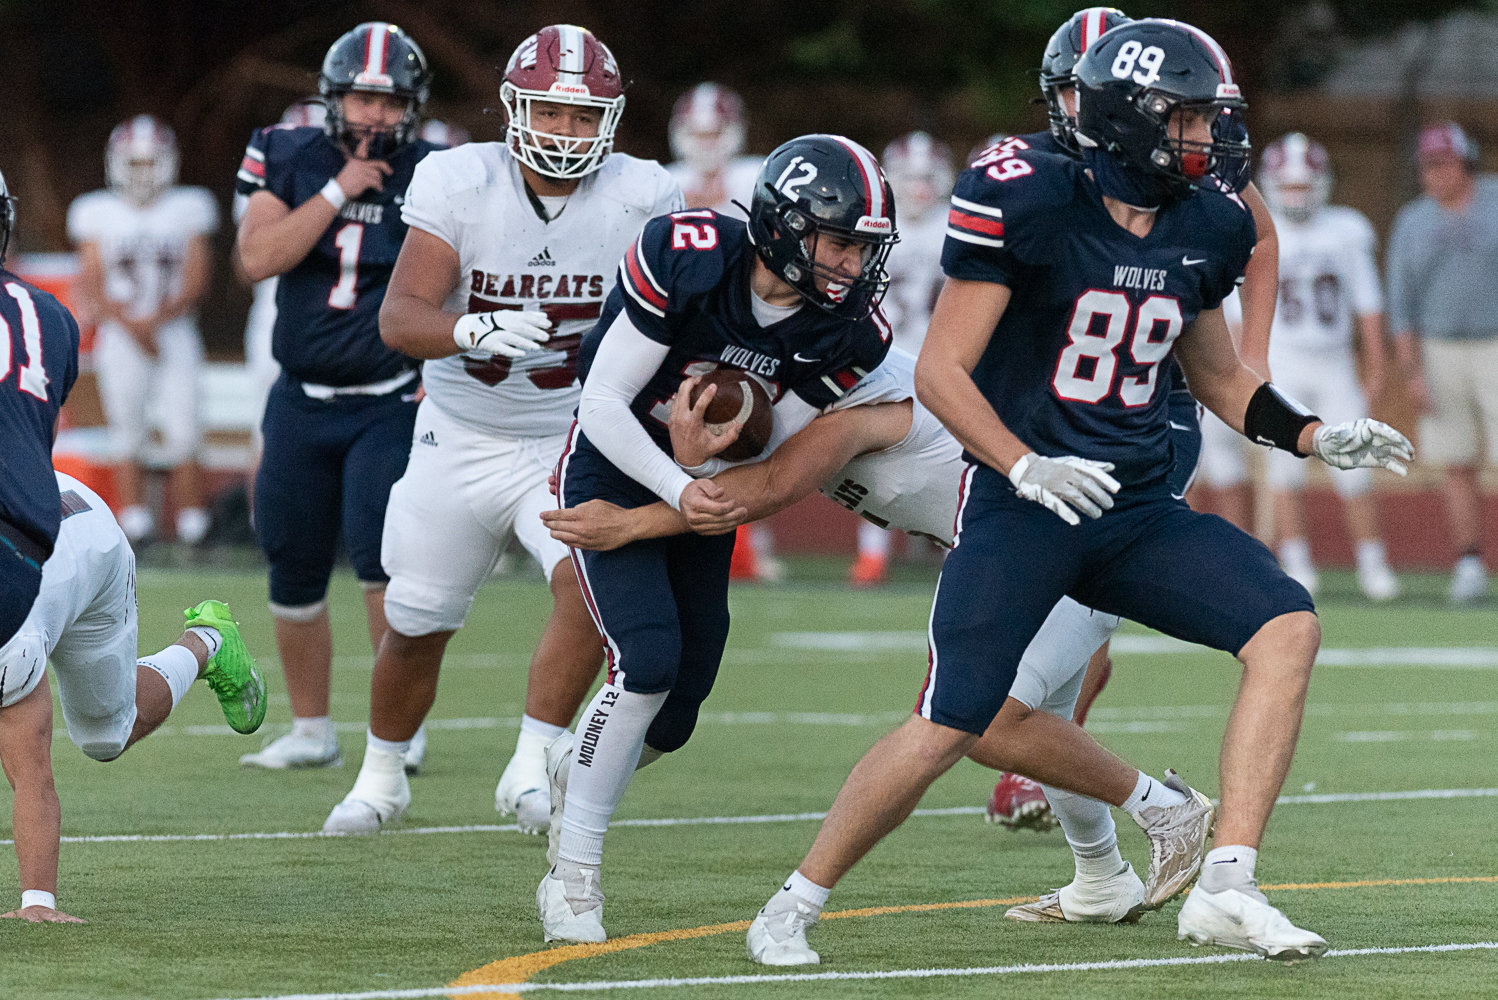 Black Hills tailback Sean Moloney gets positive yardage in the ifrst quarter of the Wolves' 35-0 loss to W.F. West on Sept. 23 at Tumwater District Stadium.